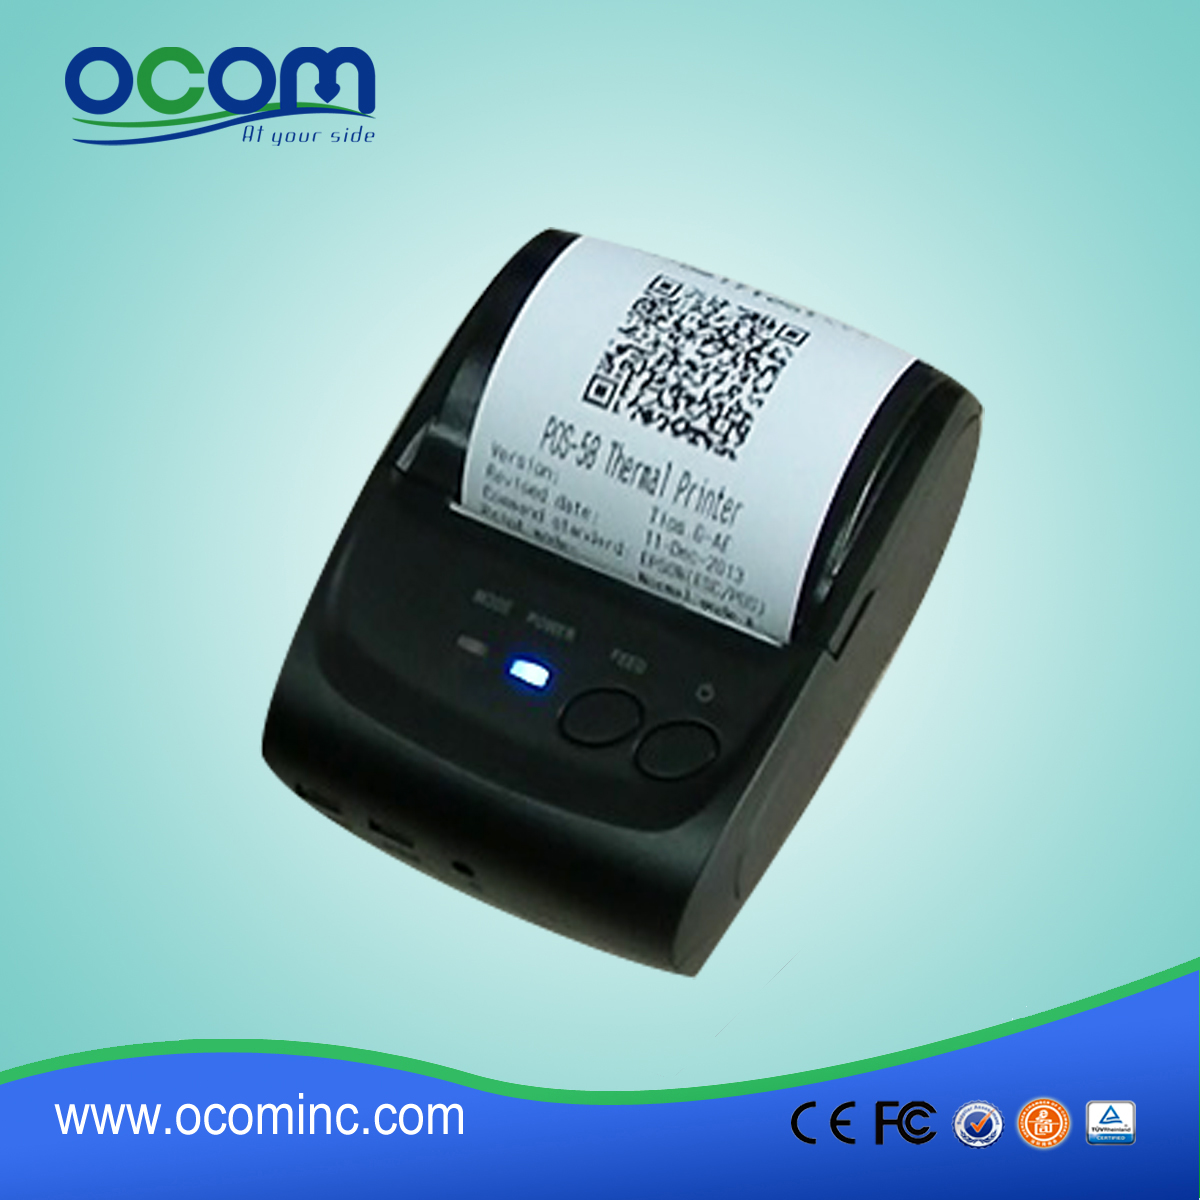 58mm mini Bluetooth Thermal Printer support android phone or tablet